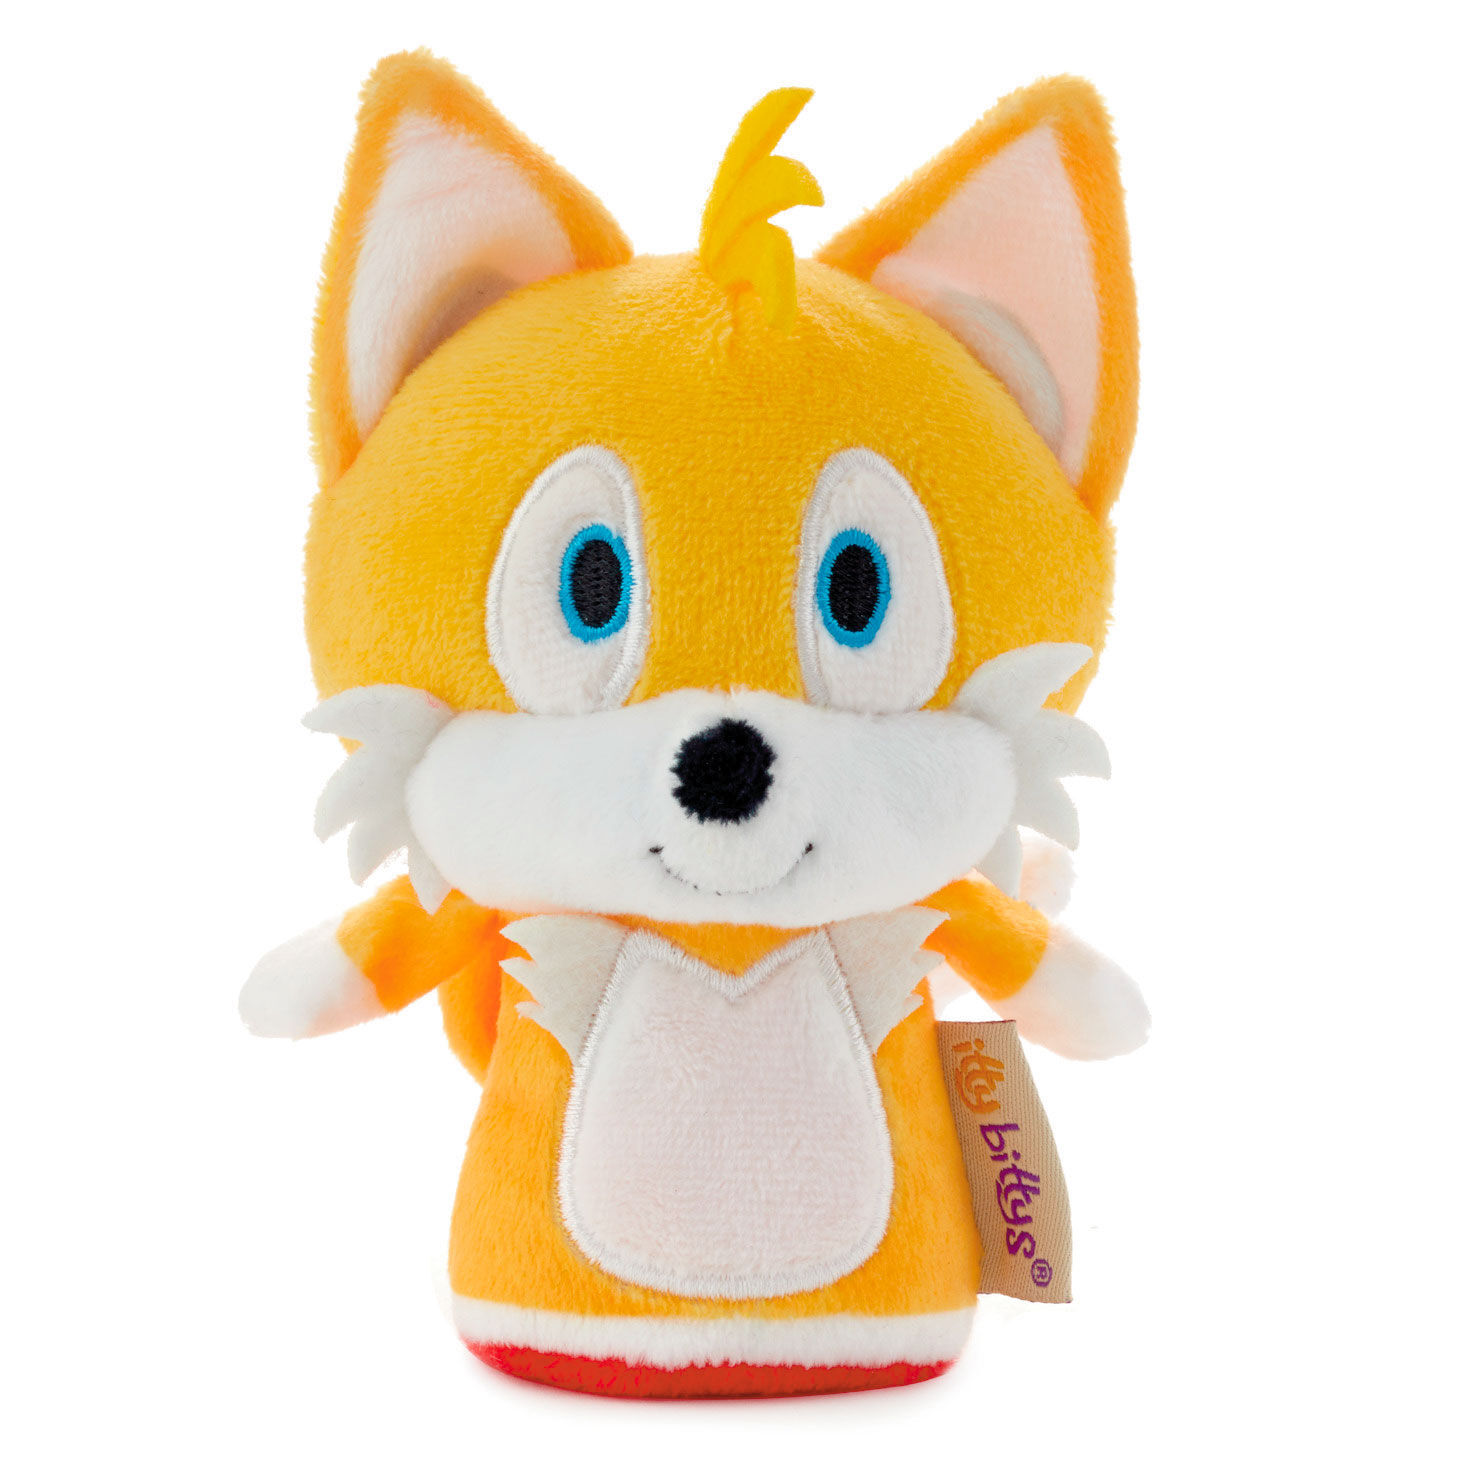 look at thease SEGA-Sonic-the-Hedgehog-Tails-Plush-itty-bittys_1KDD2080_01